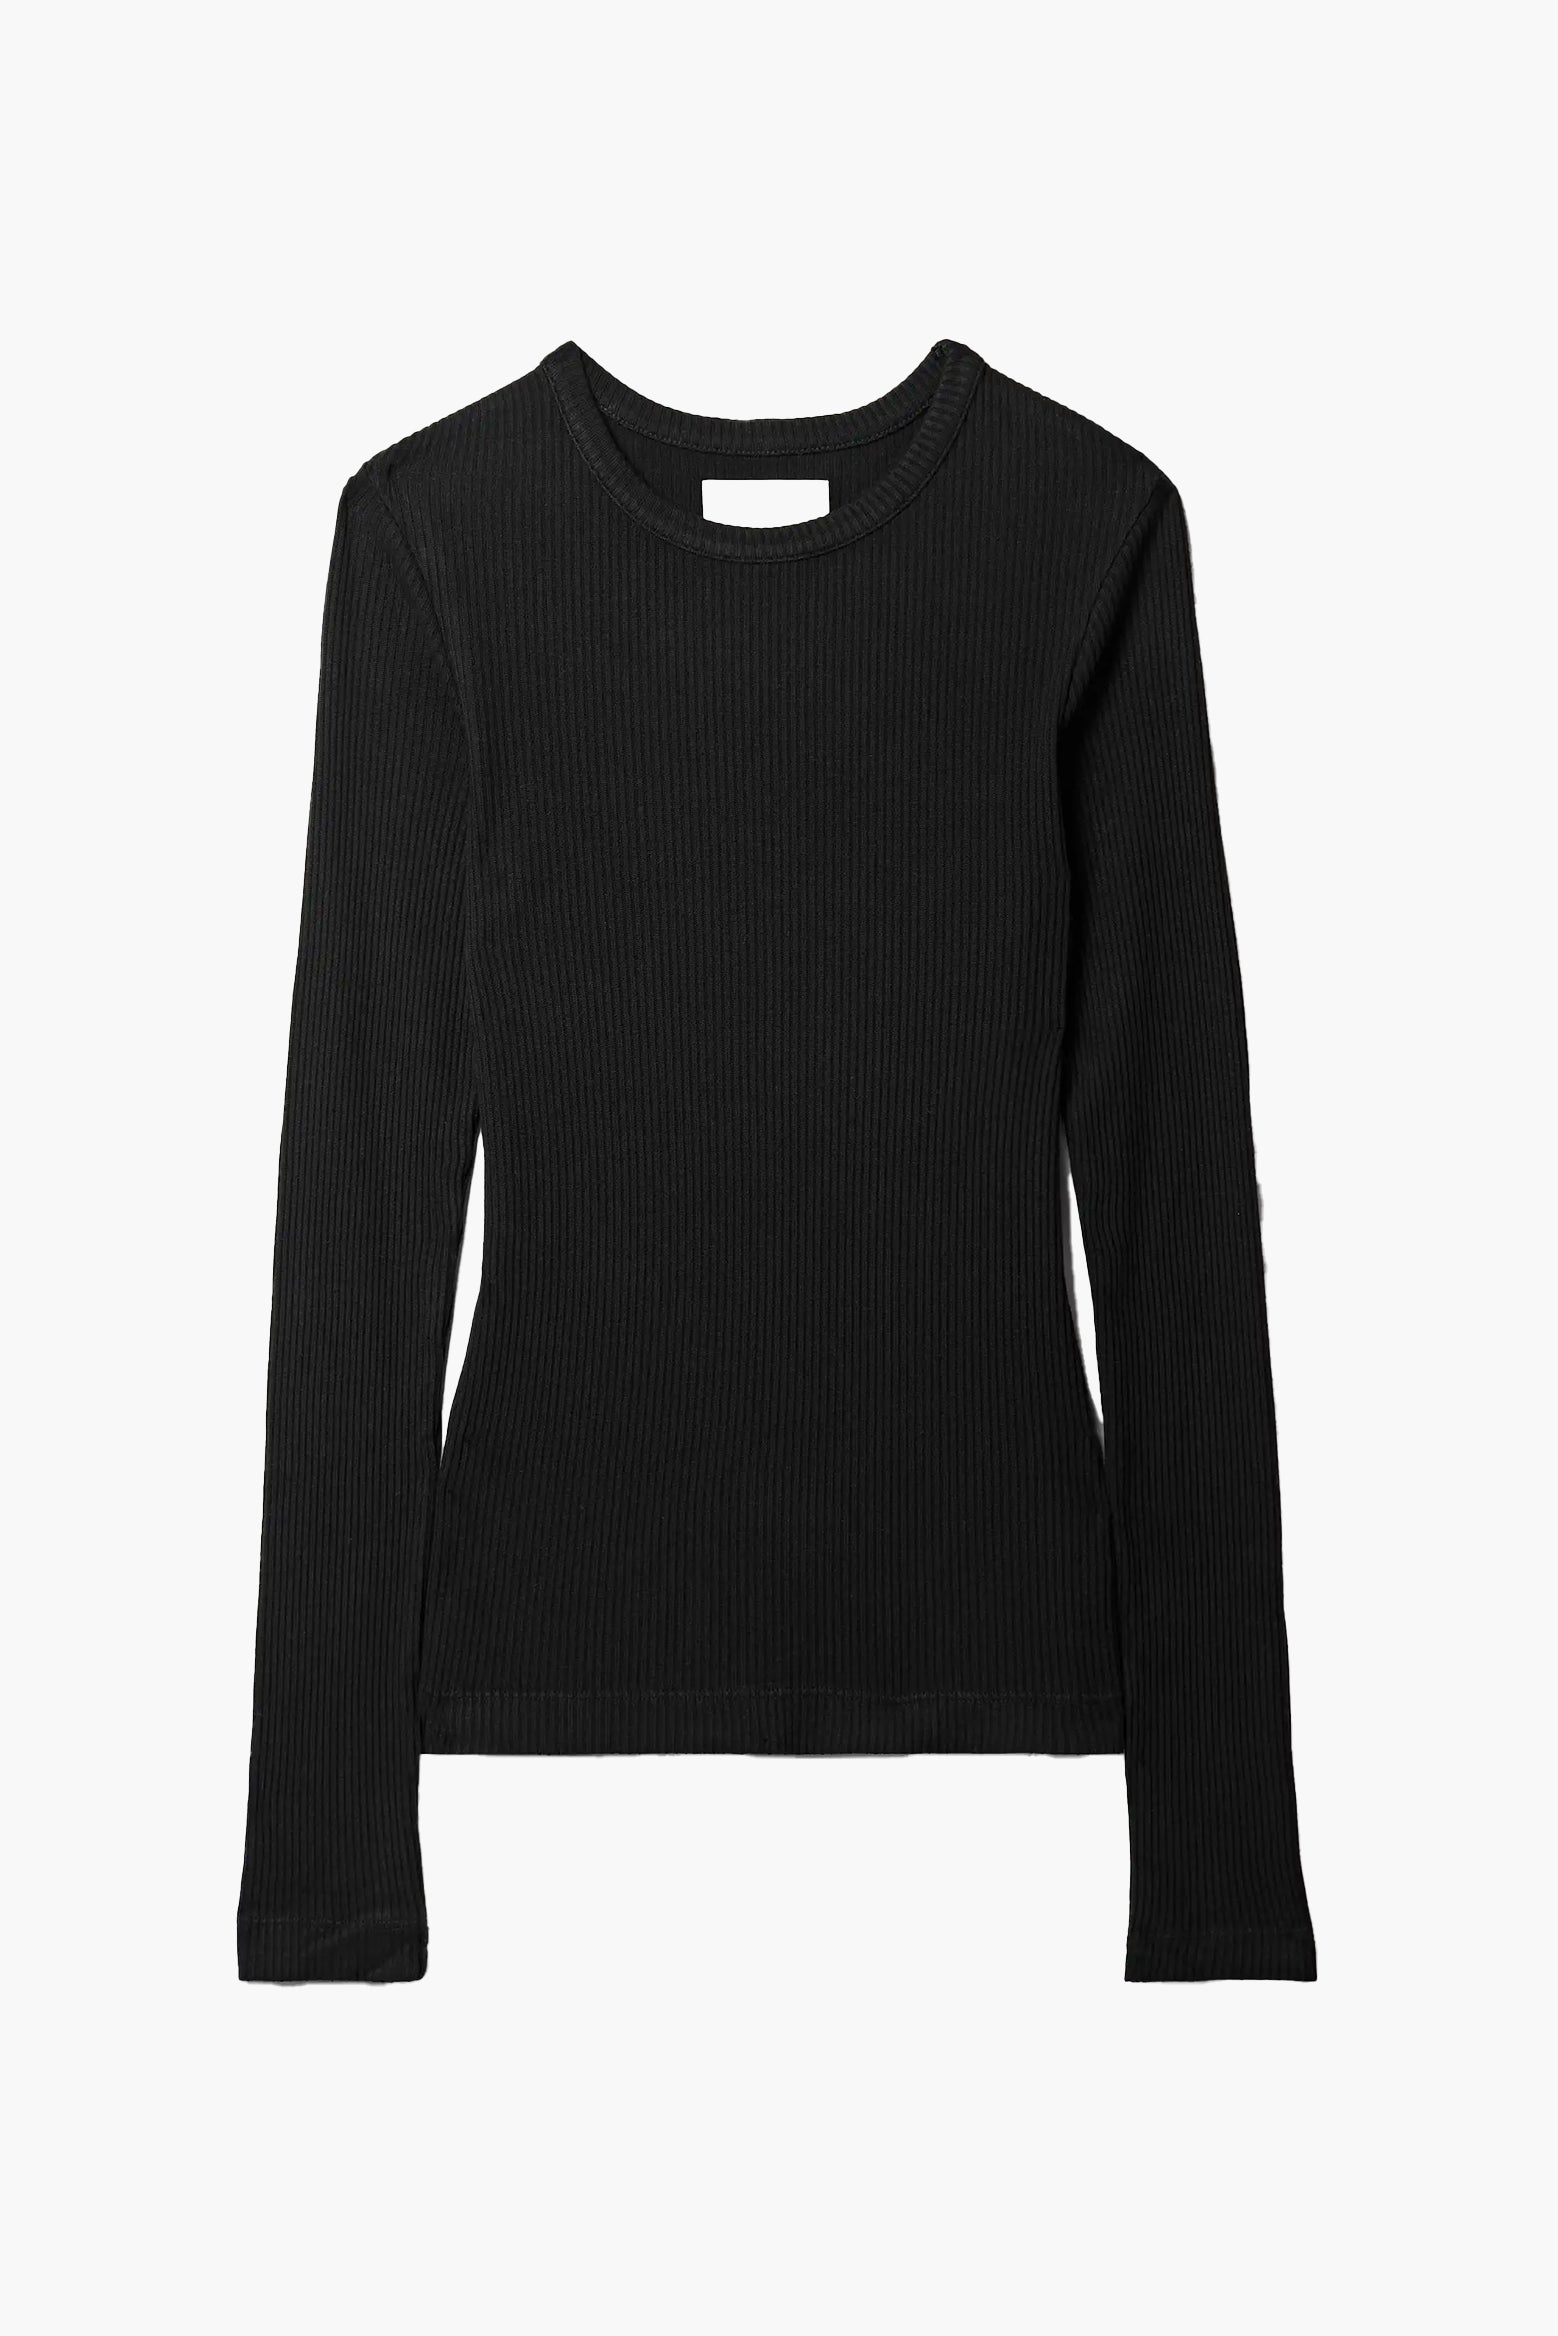 Citizens Of Humanity Bina Crewneck in Black available at The New Trend Australia.